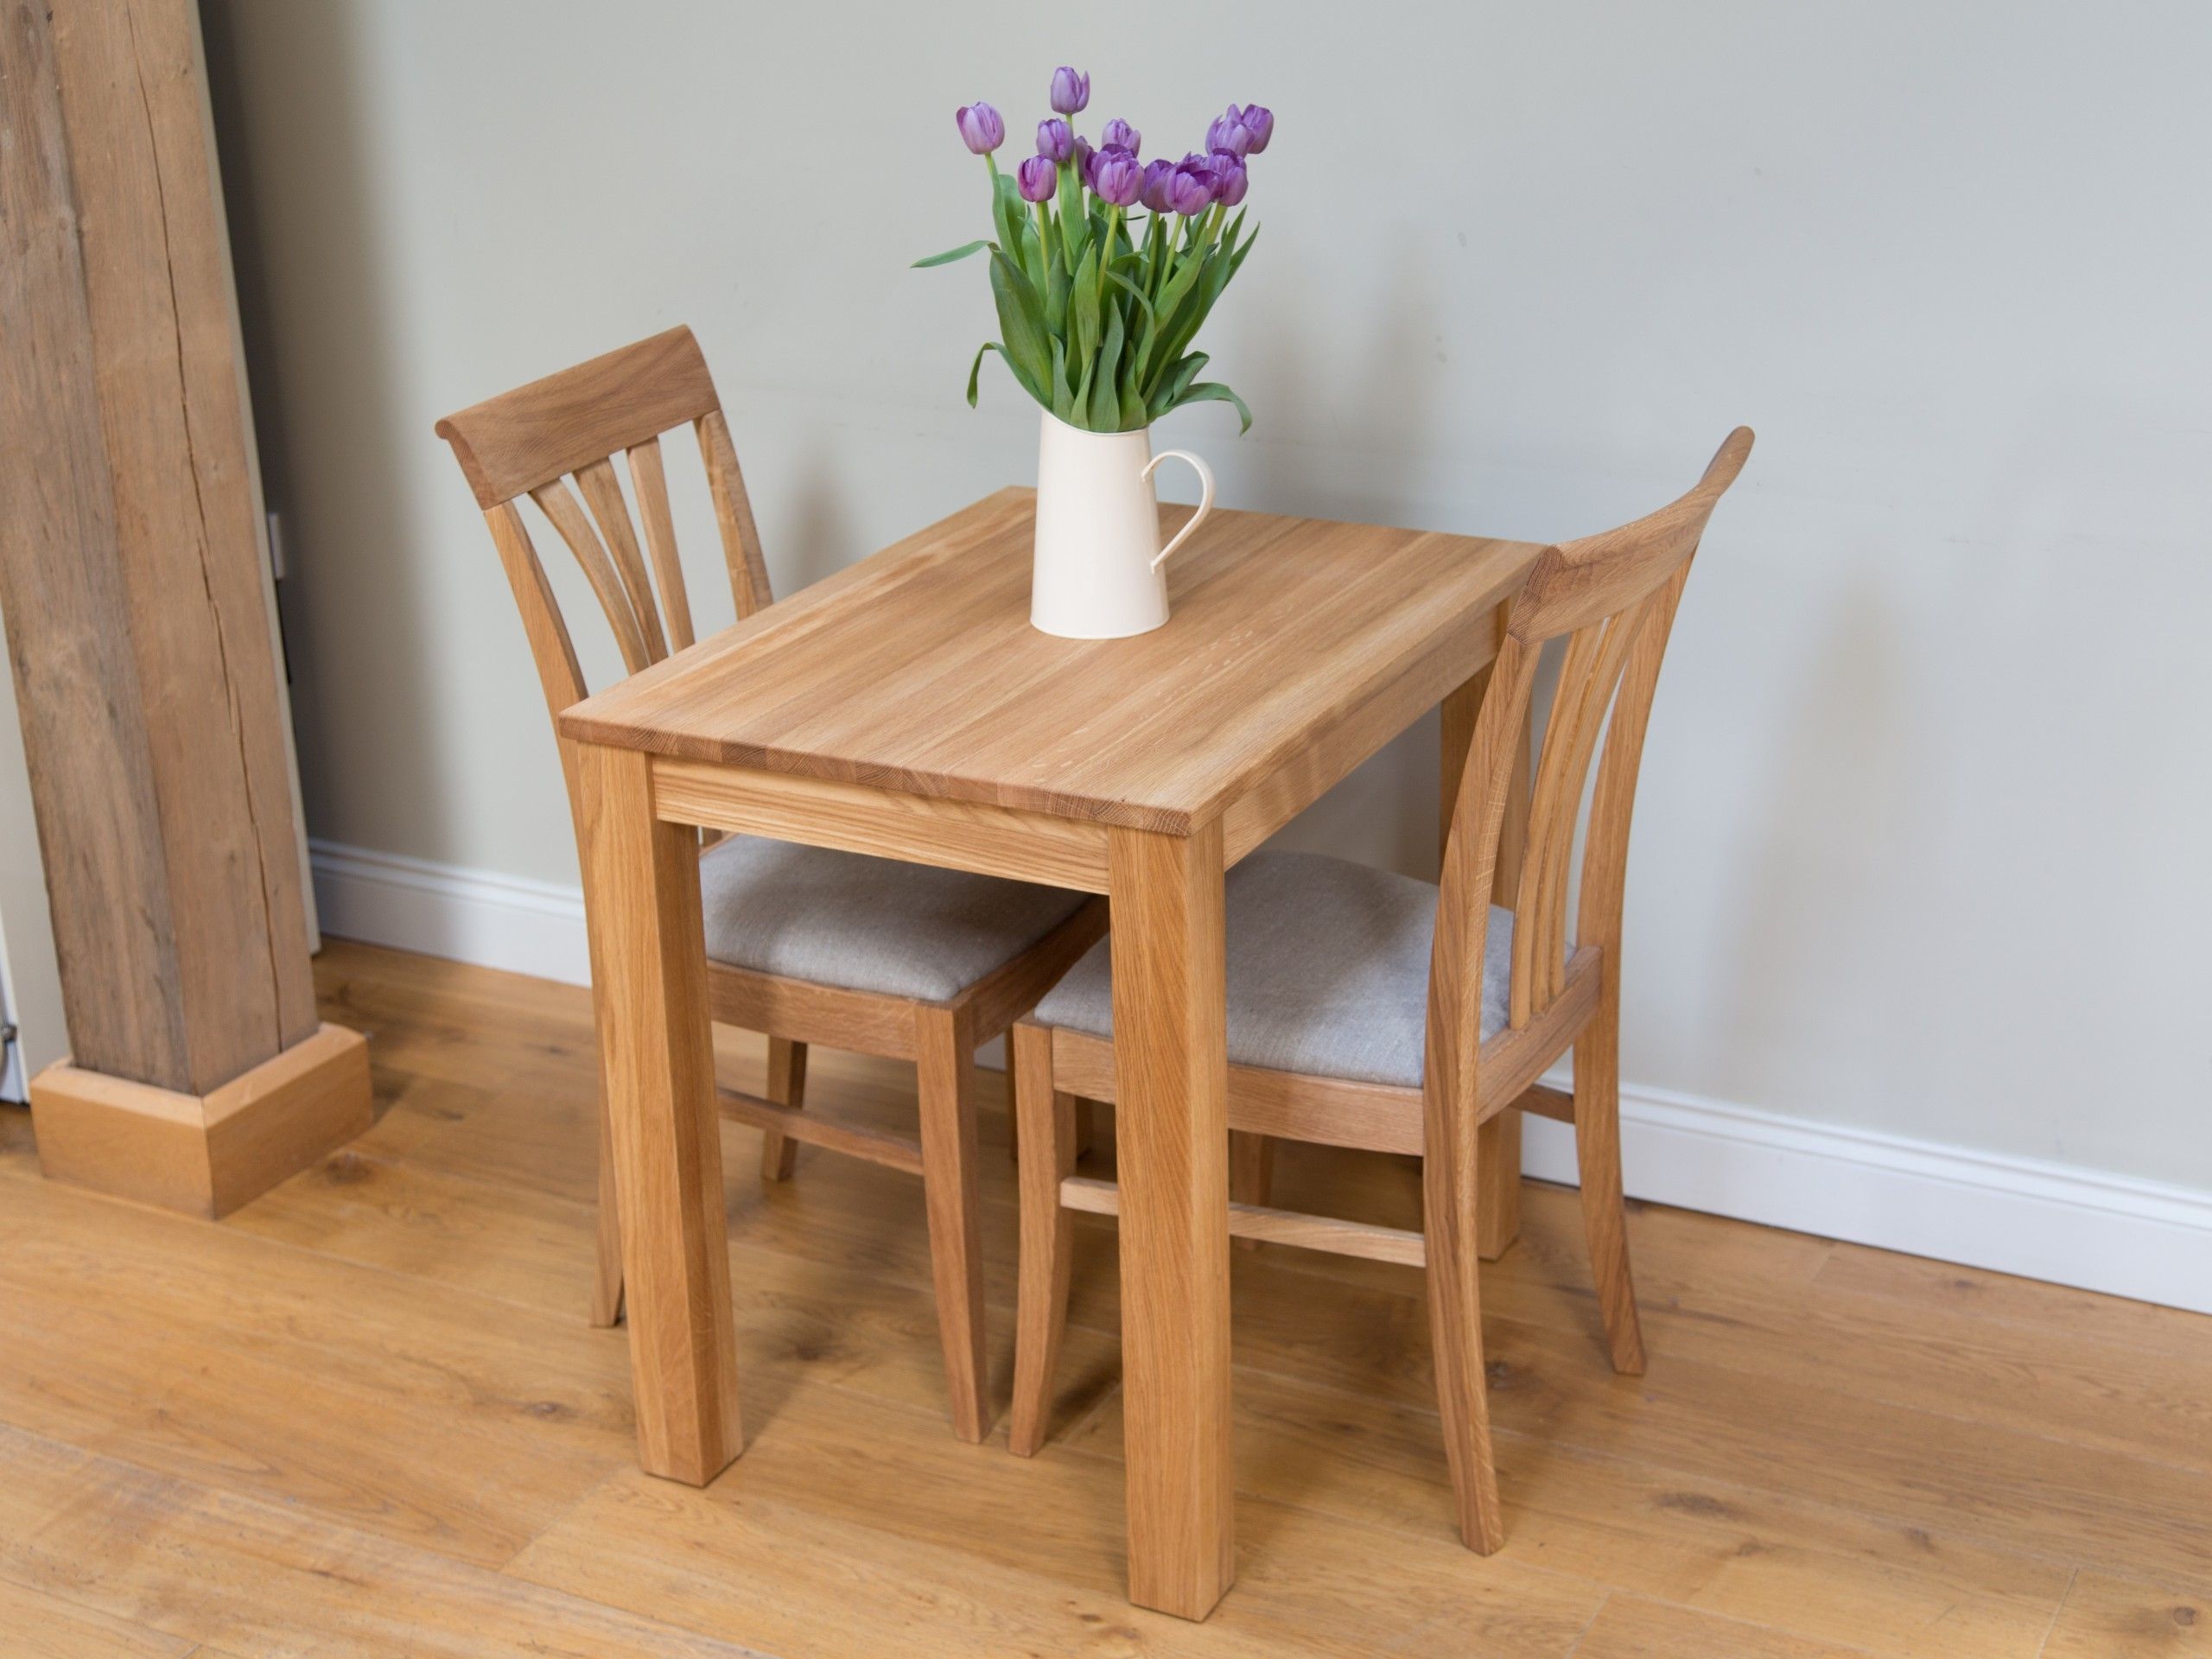 Oak Kitchen Table Chair Dining Set From Top Furniture, At A Table Inside Trendy Dining Tables And Chairs For Two (View 6 of 25)